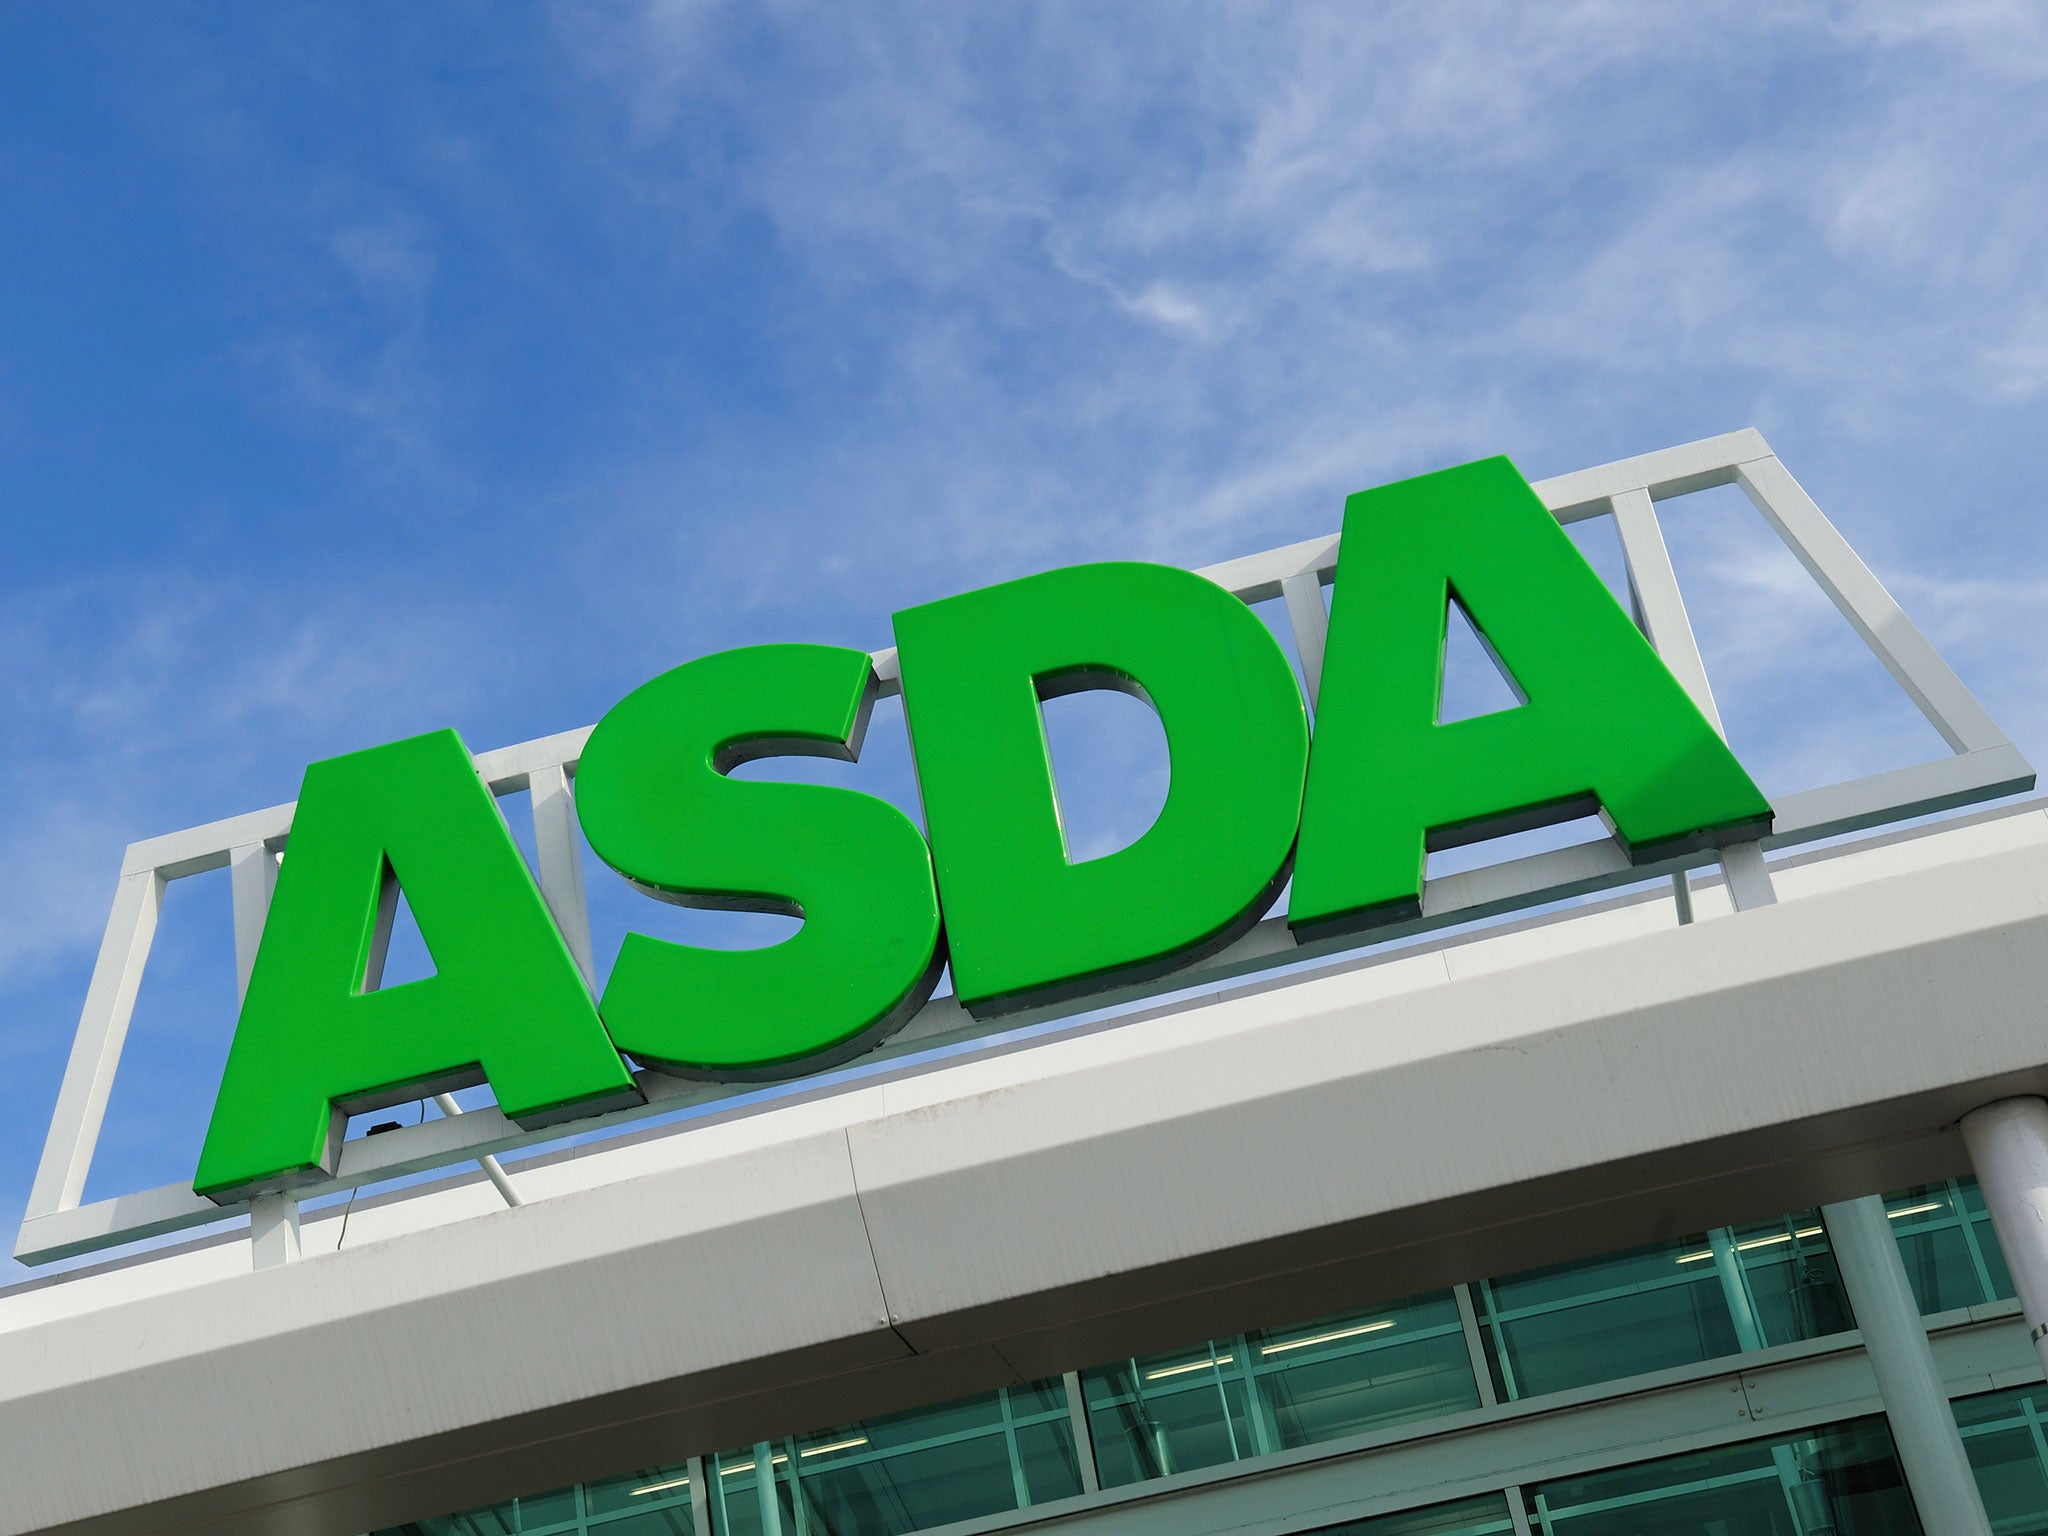 The Asda Living store at the Manchester Fort shopping centre also opened an hour early at 8am on Saturday